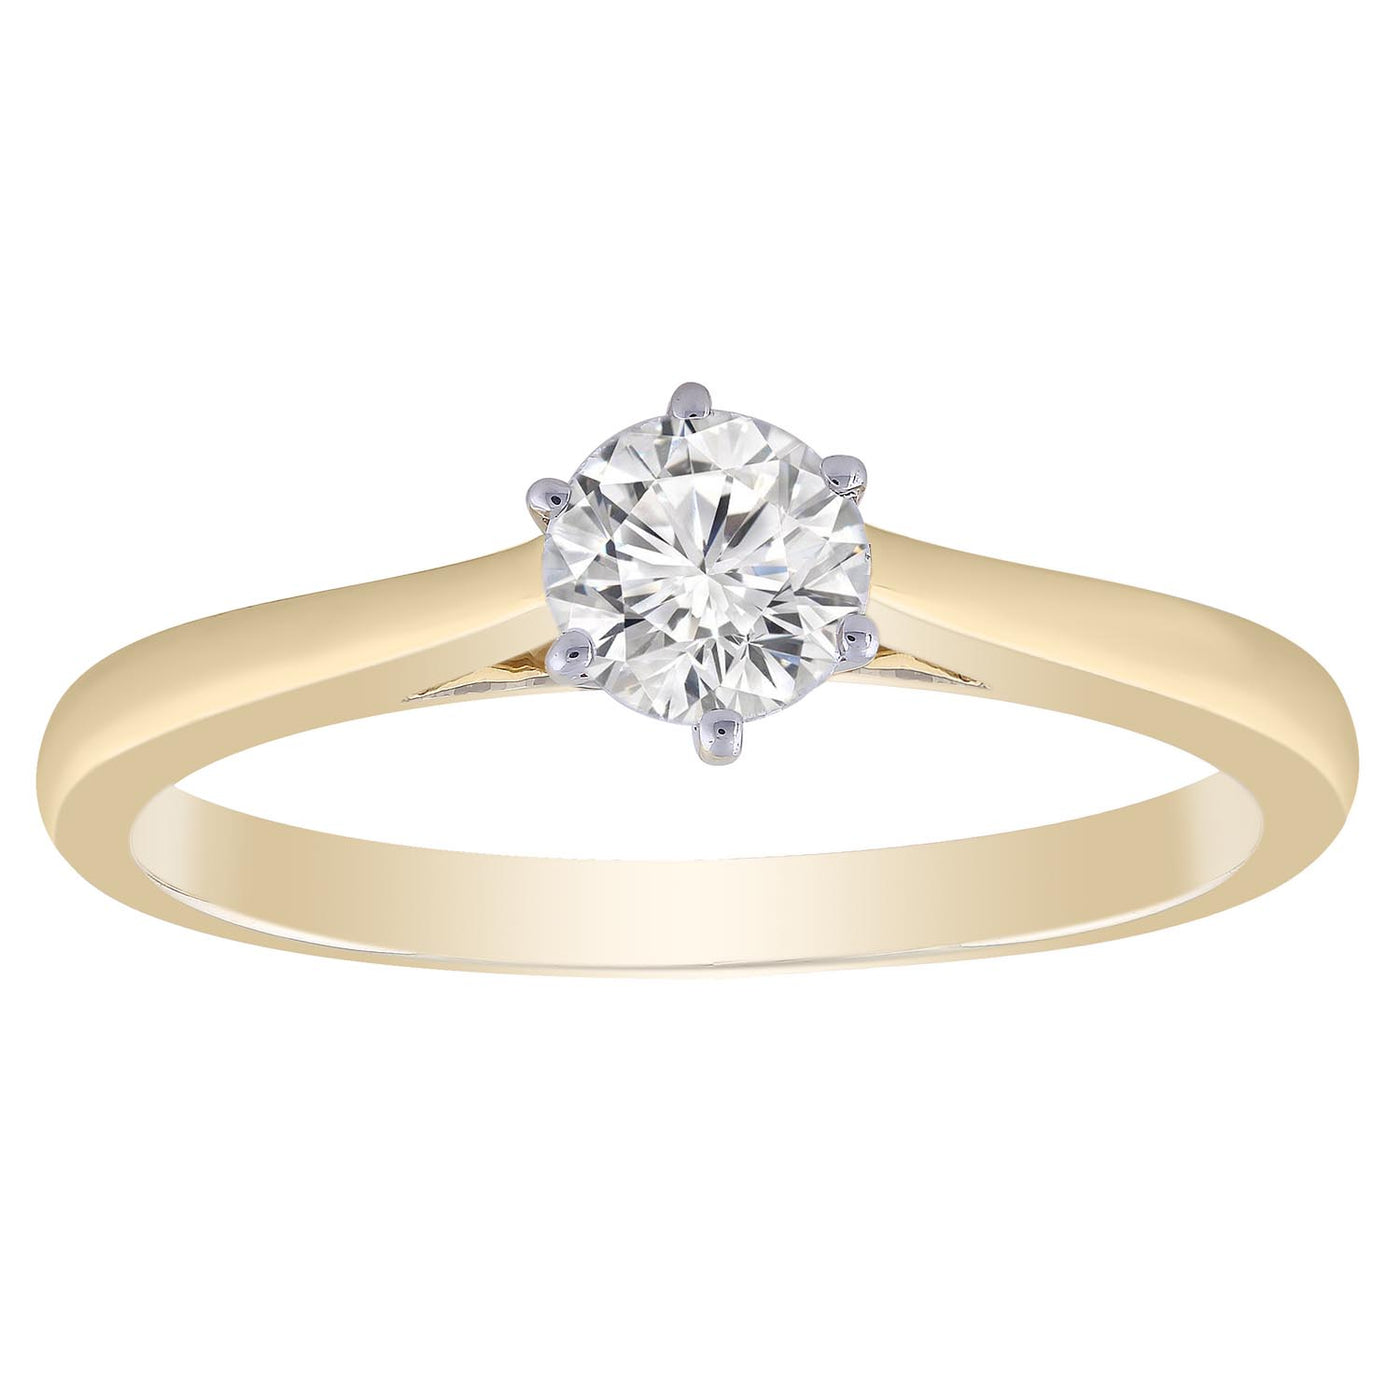 9ct Yellow Gold 0.5ct Solitaire 6 Claw Diamond Ring